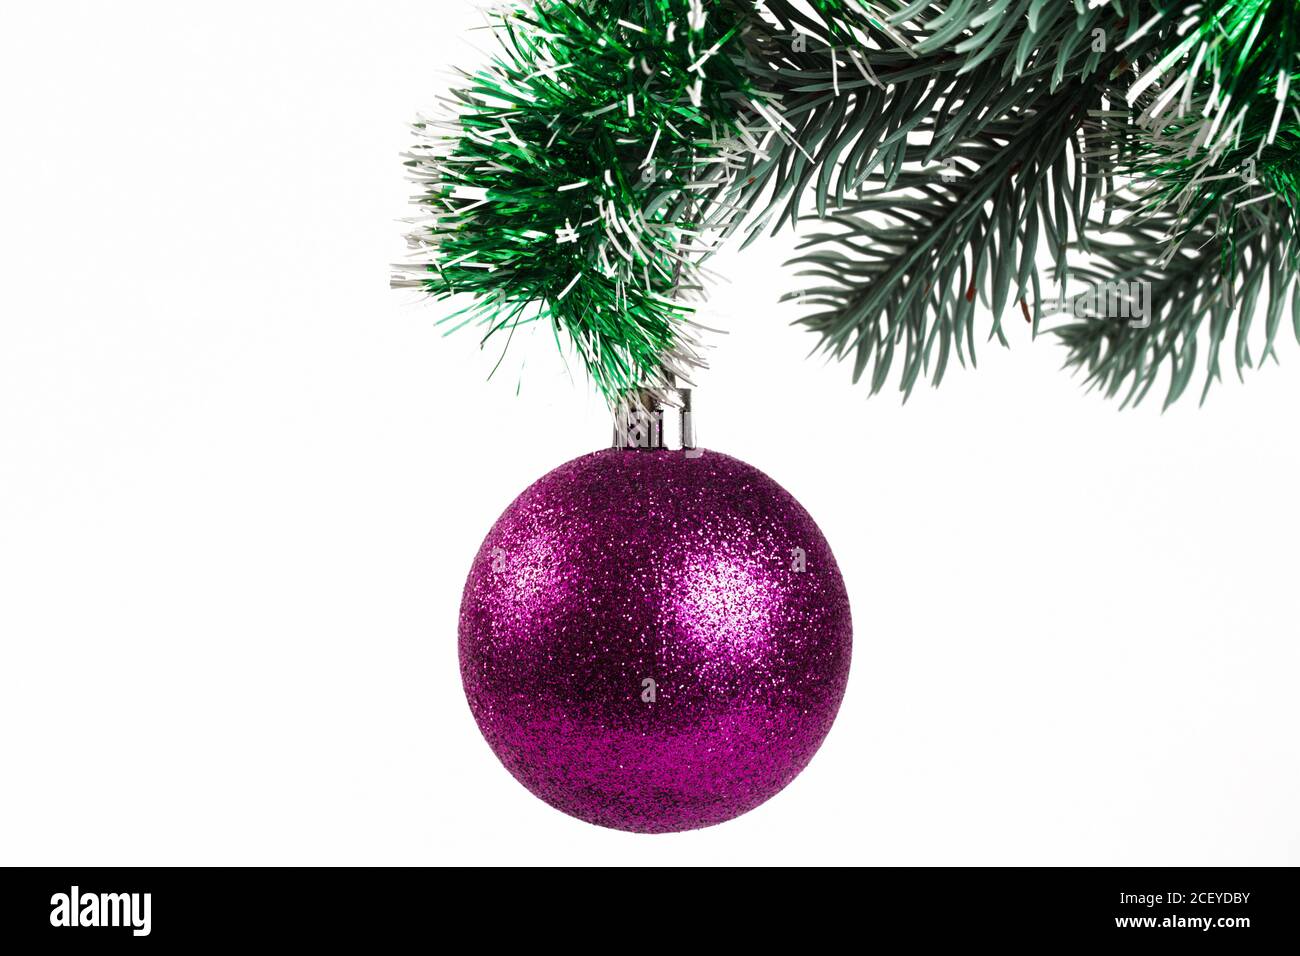 Purple Christmas ball on a spruce branch decorated with tinsel, white background, isolate. close-up Stock Photo